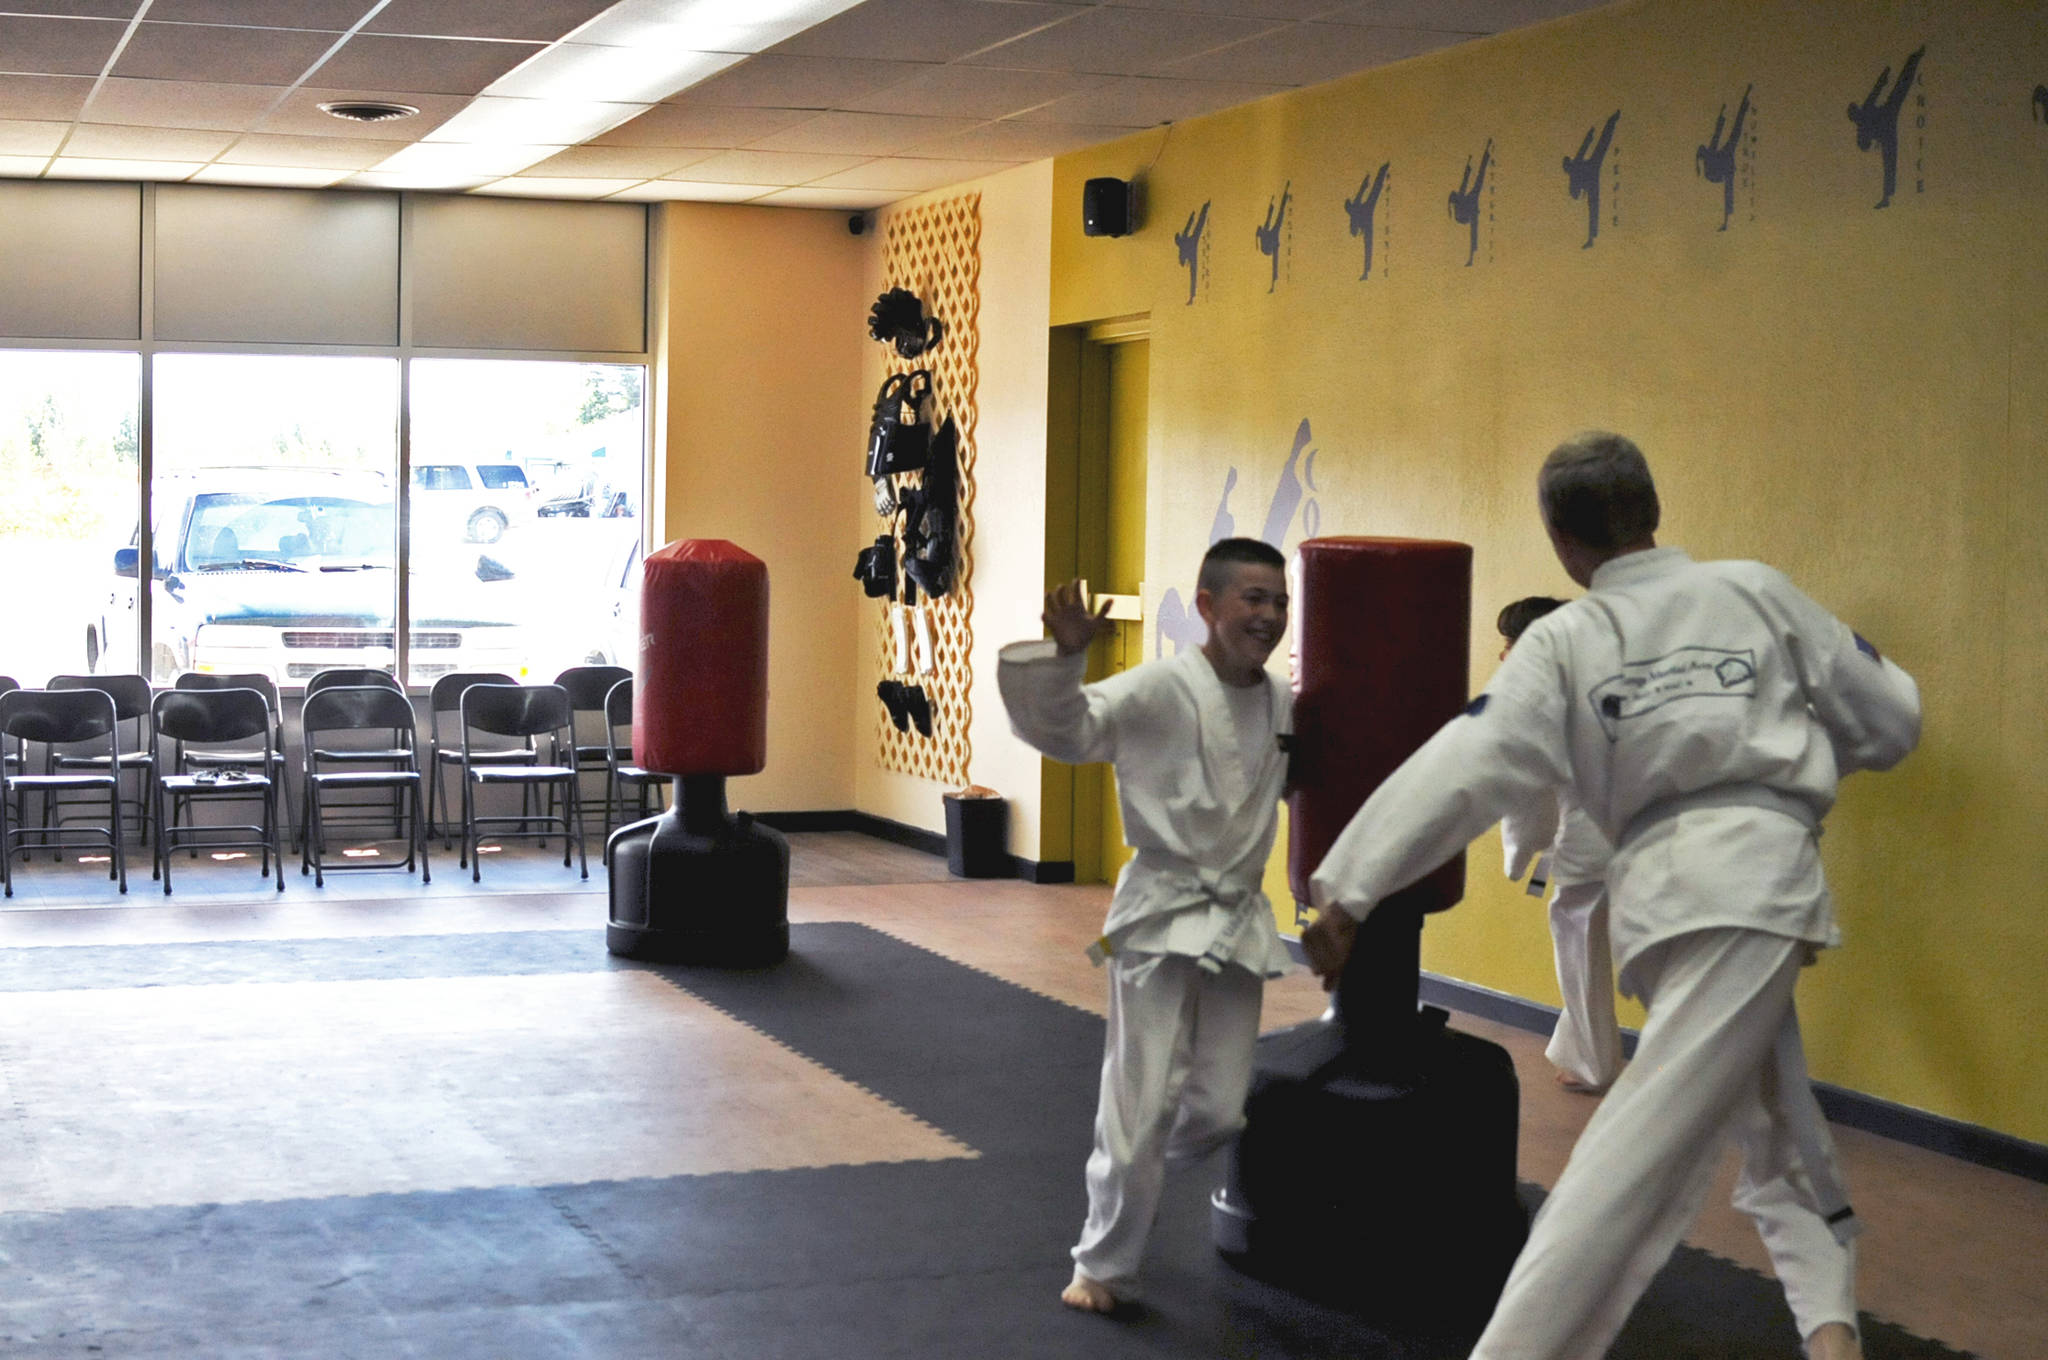 Students run off some energy before taekwondo class begins at Challenge Martial Arts Studio on Monday, Aug. 14, 2017 in Nikiski, Alaska. The studio, which opened in June, offers taekwondo and kickboxing classes in a renovated studio a few doors down from the M&M Supermarket on the Kenai Spur Highway. (Photo by Elizabeth Earl/Peninsula Clarion)